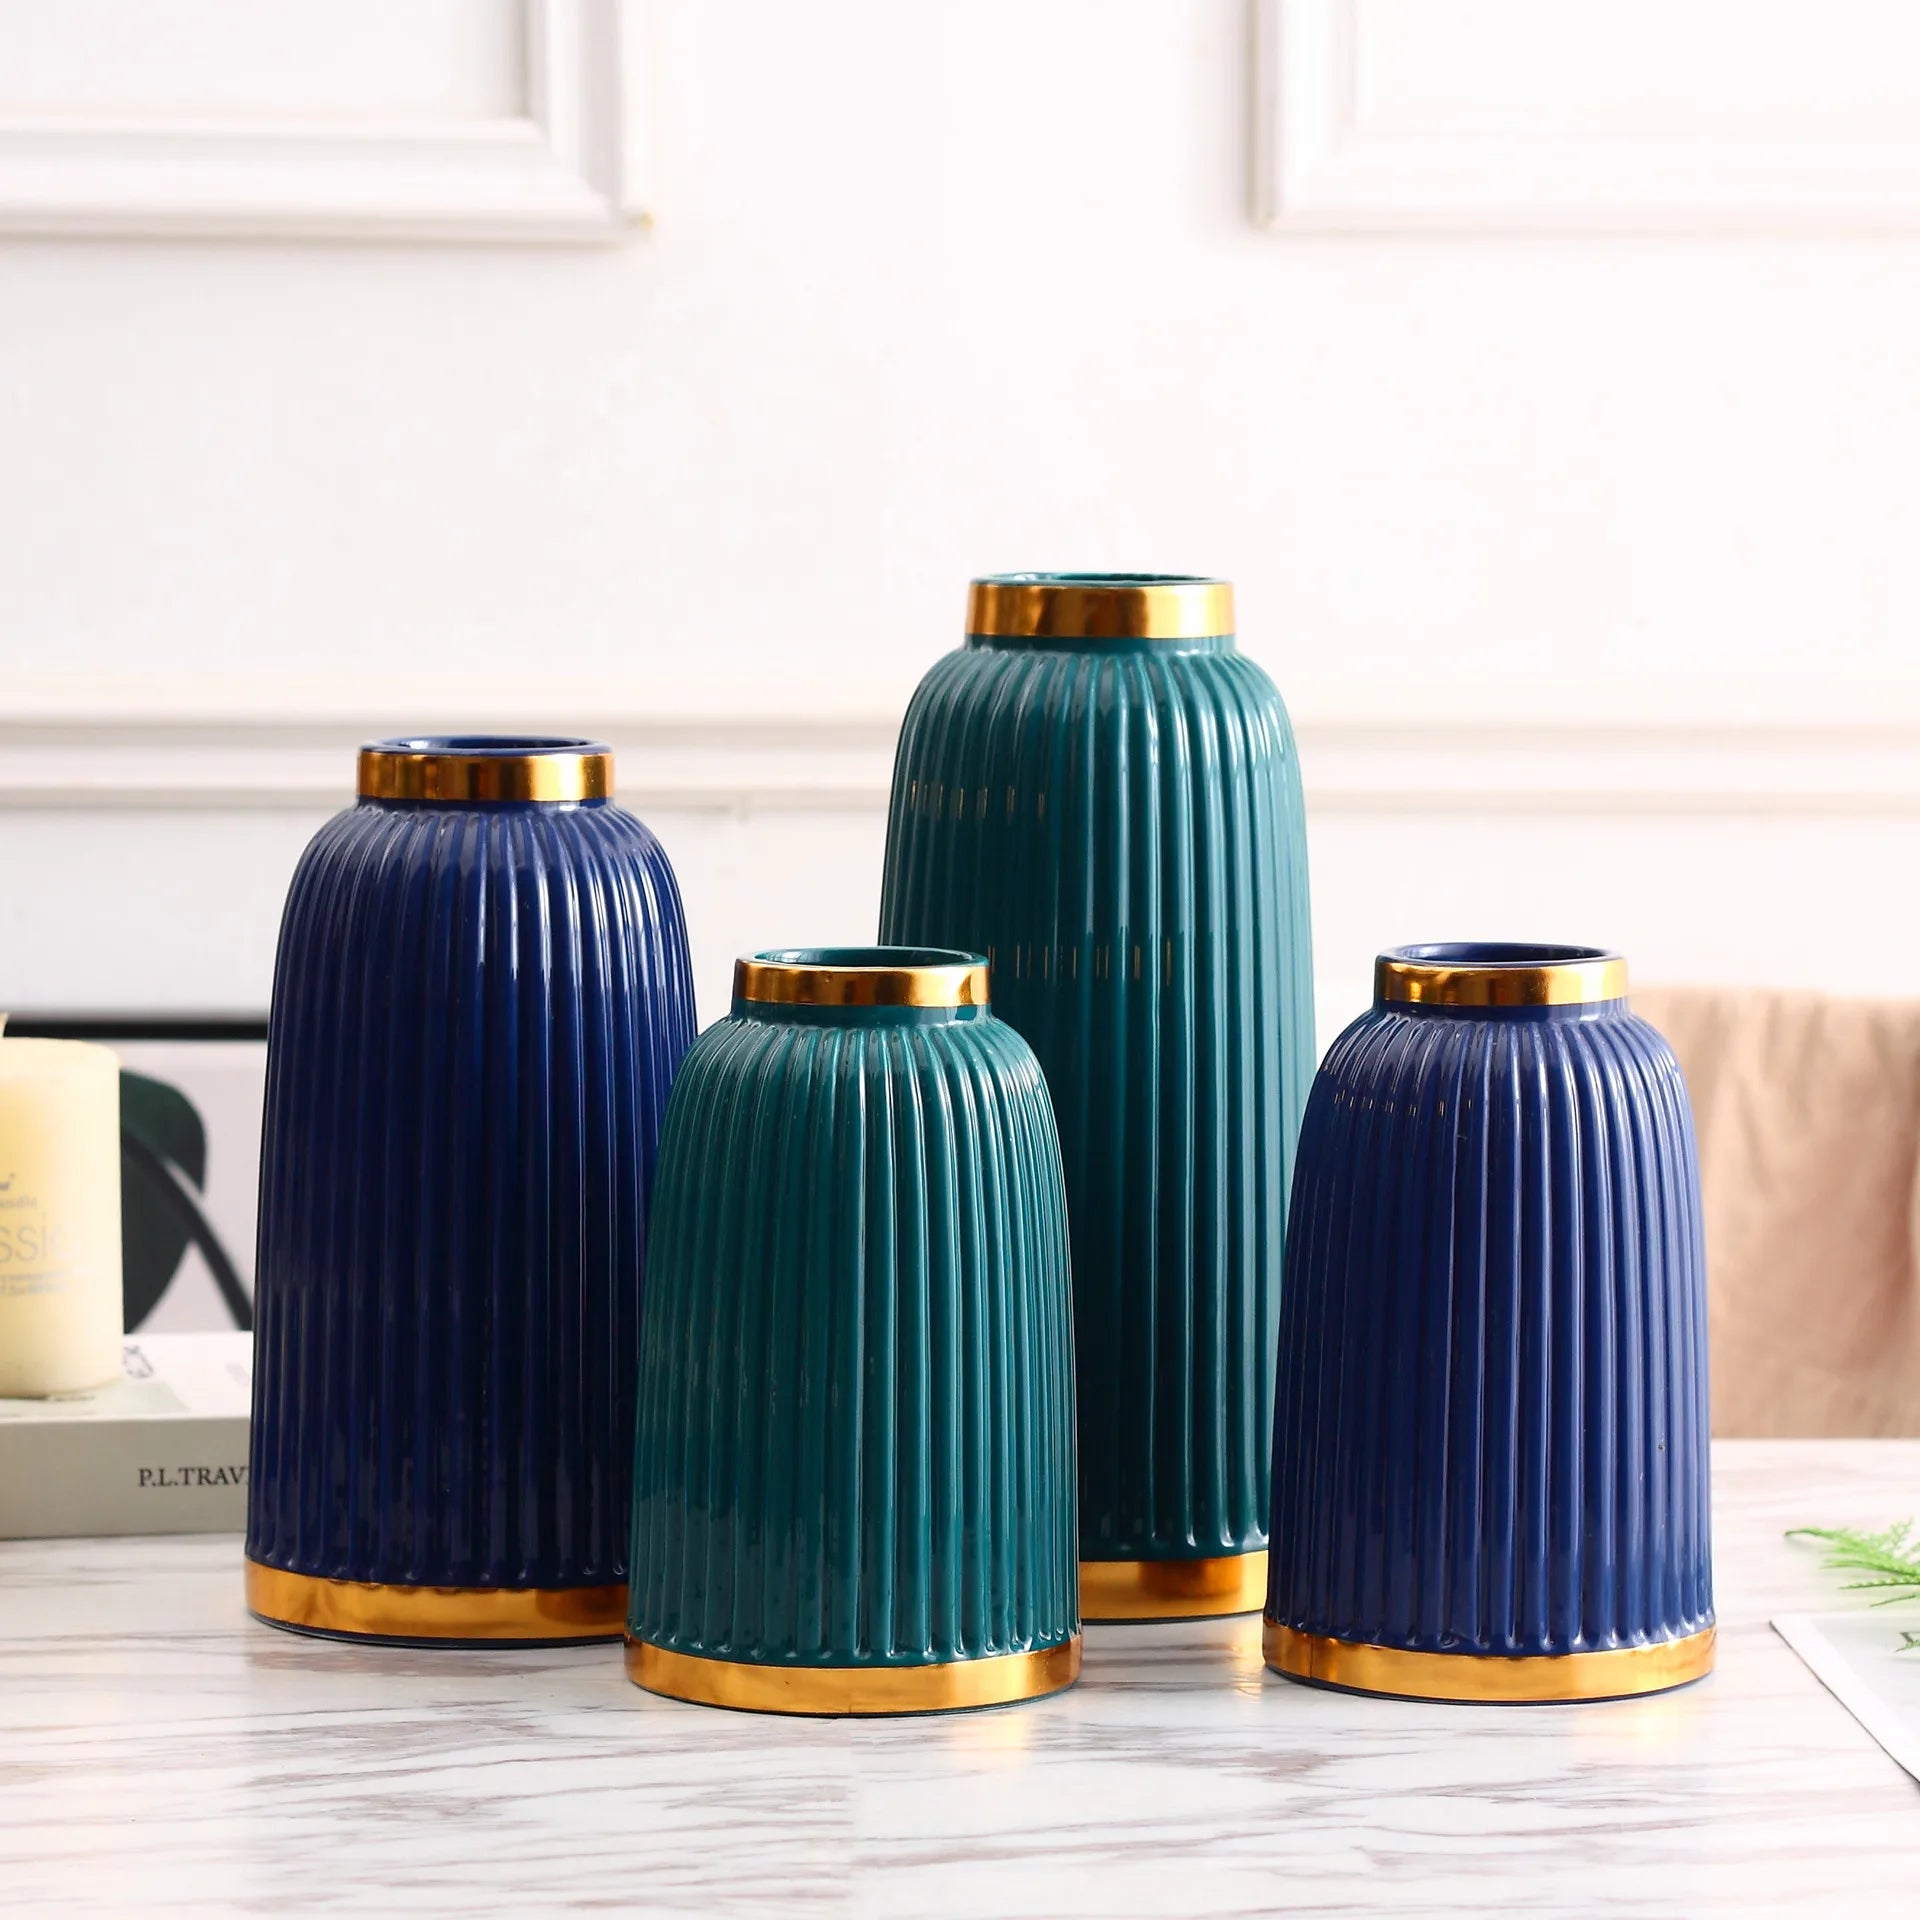 Modern Minimalist Ceramic Vases Set in White, Tibetan Blue, and Green - Home Decor Accessories for Living Room